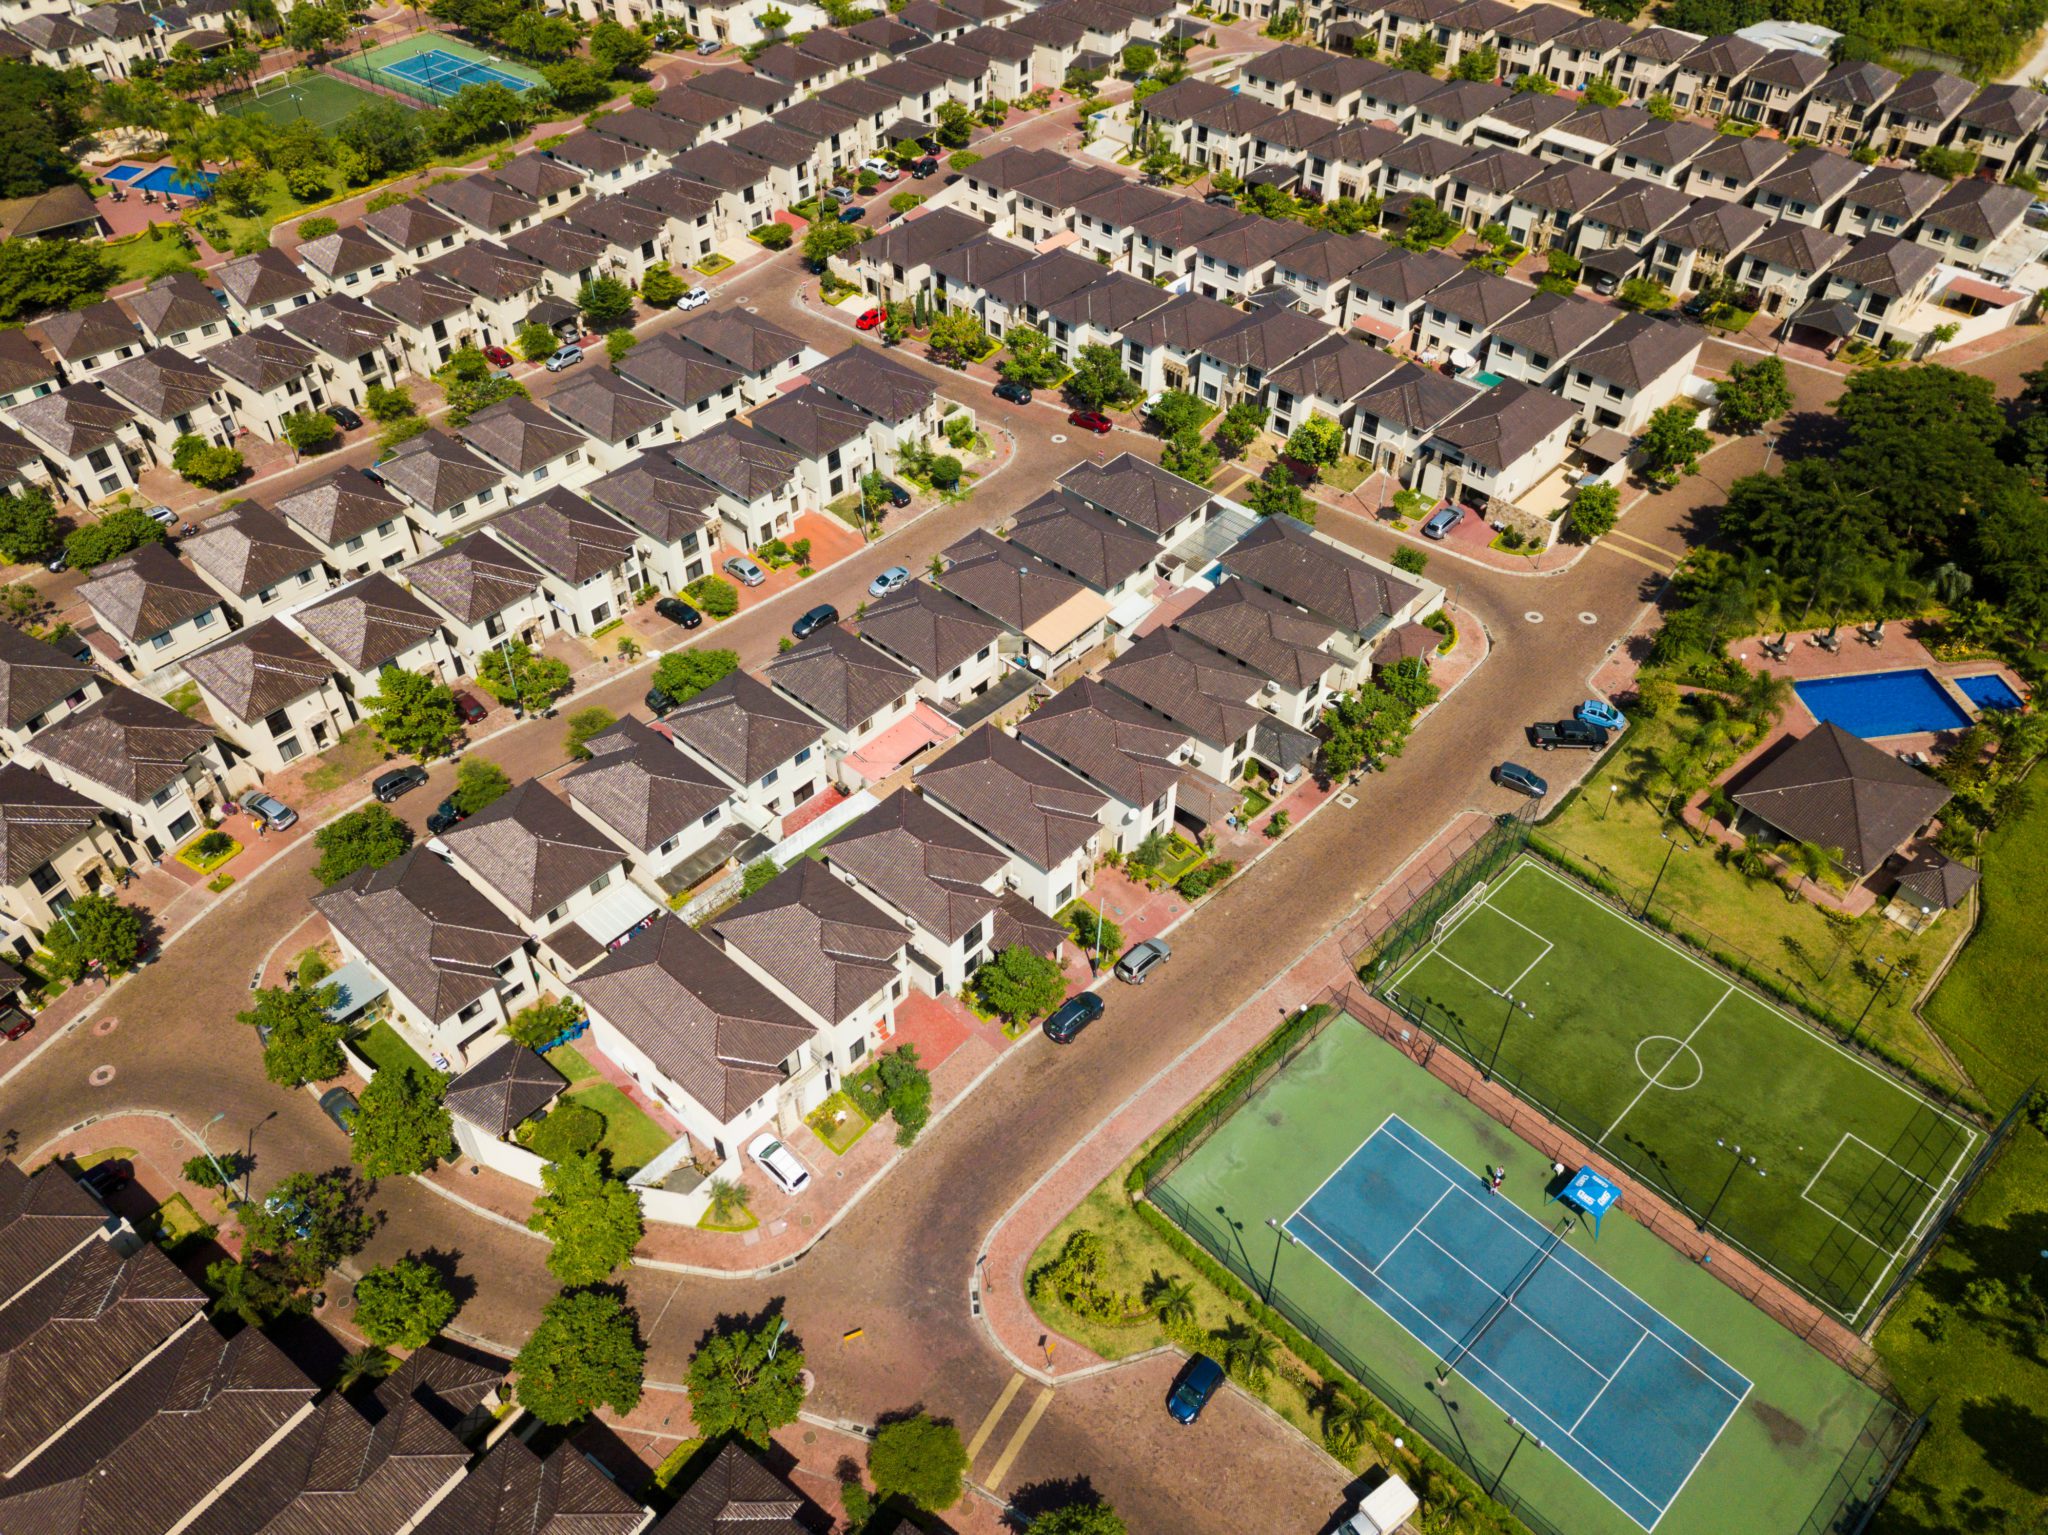 An,Aerial,View,Of,Houses,Of,A,Gated,Community,Un